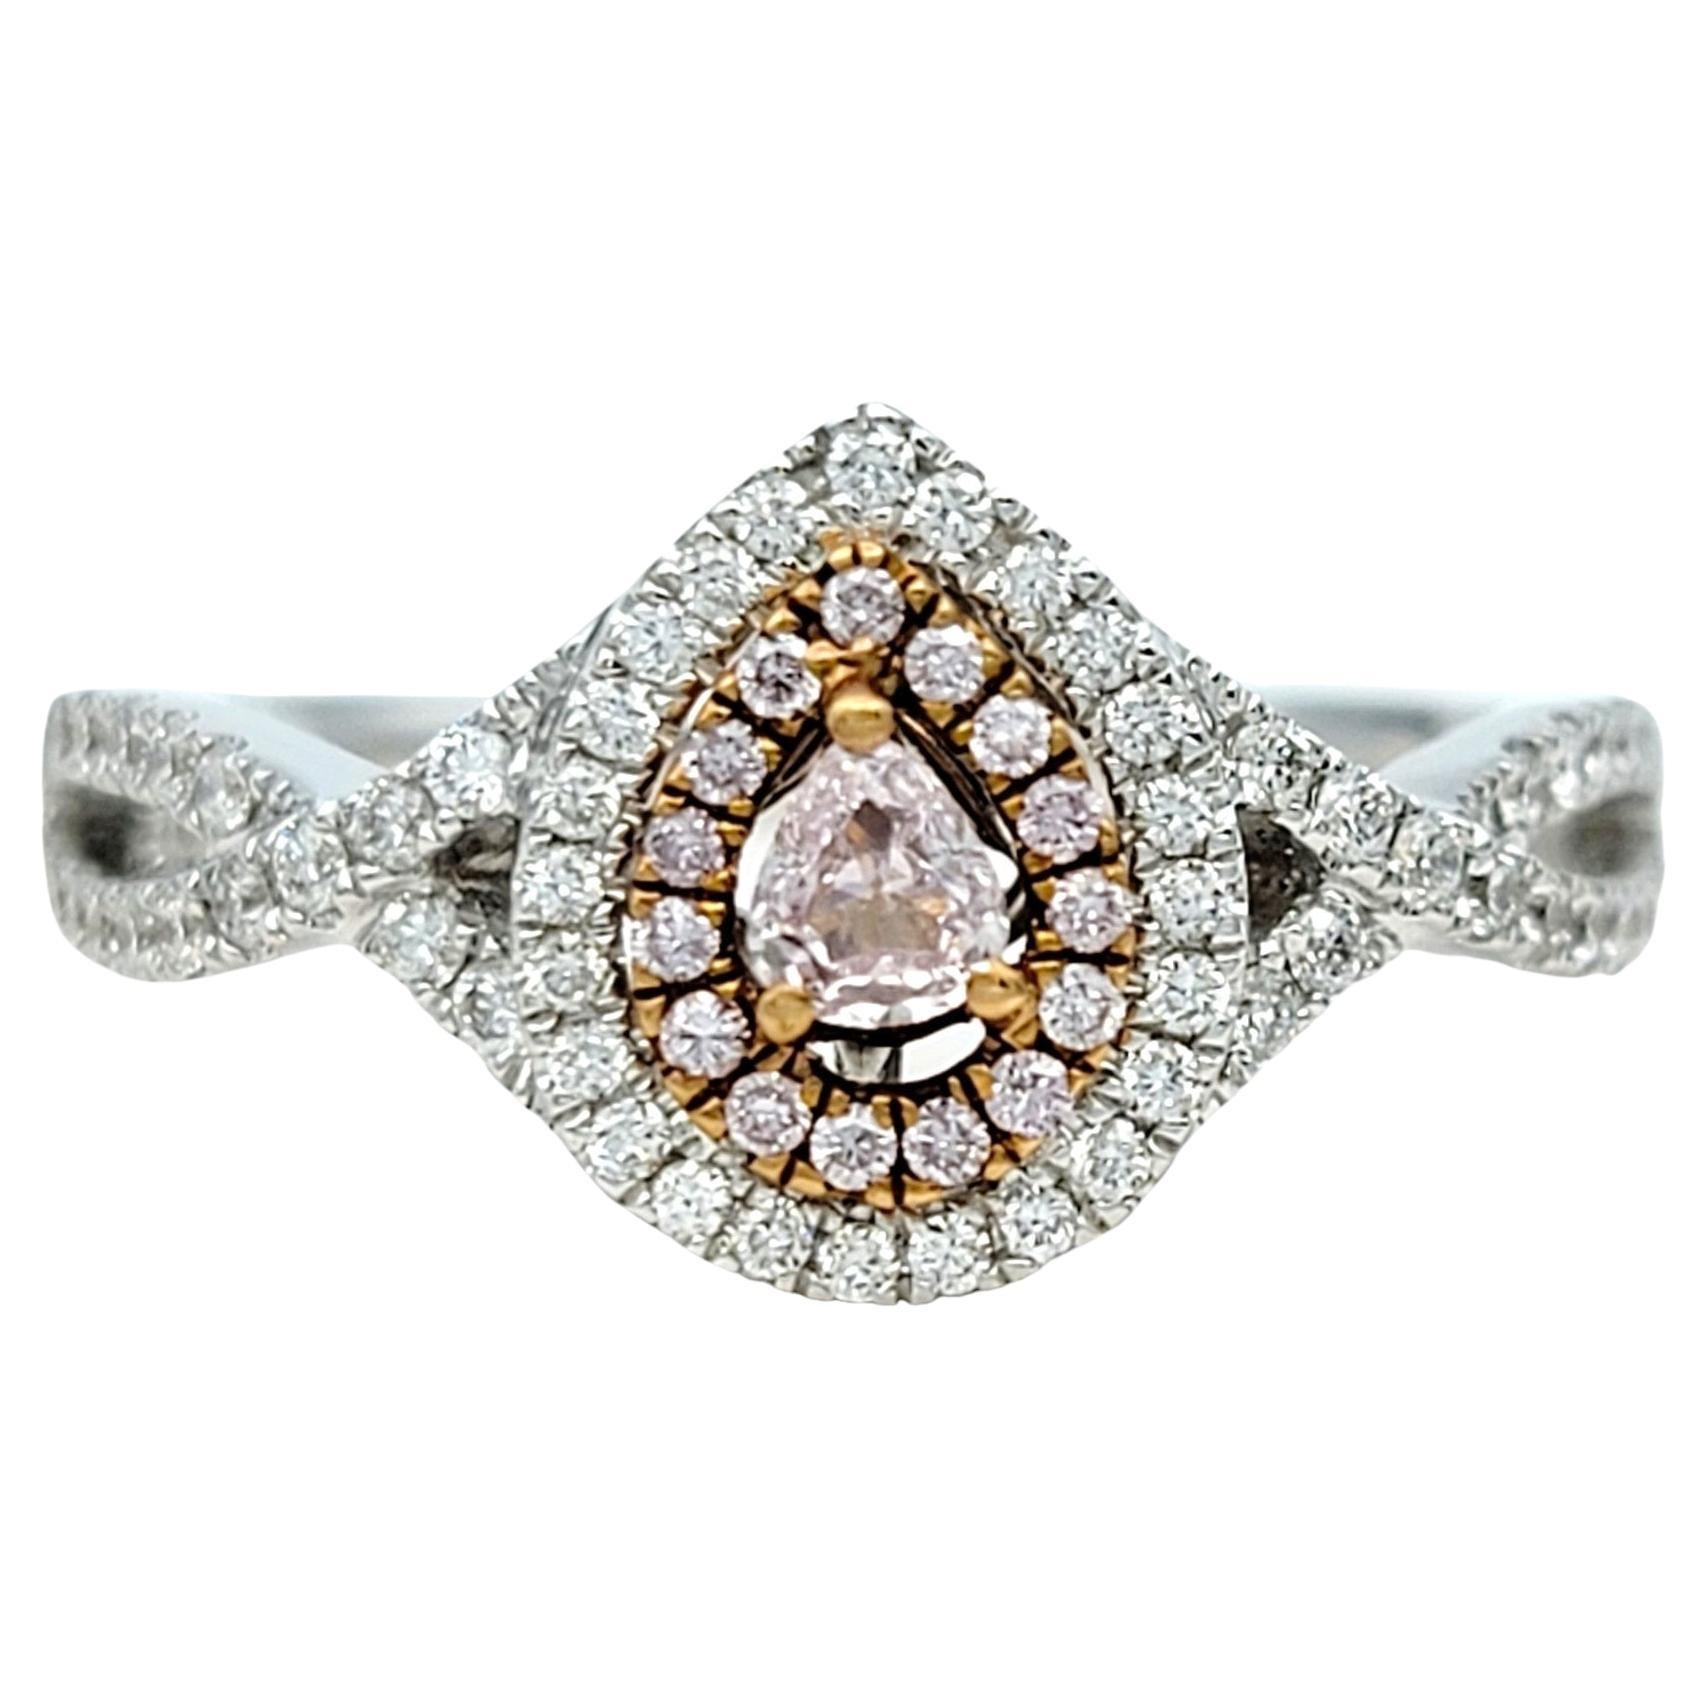 Pink and White Pear-Shaped Diamond Double Halo Ring Set in 18 Karat White Gold For Sale